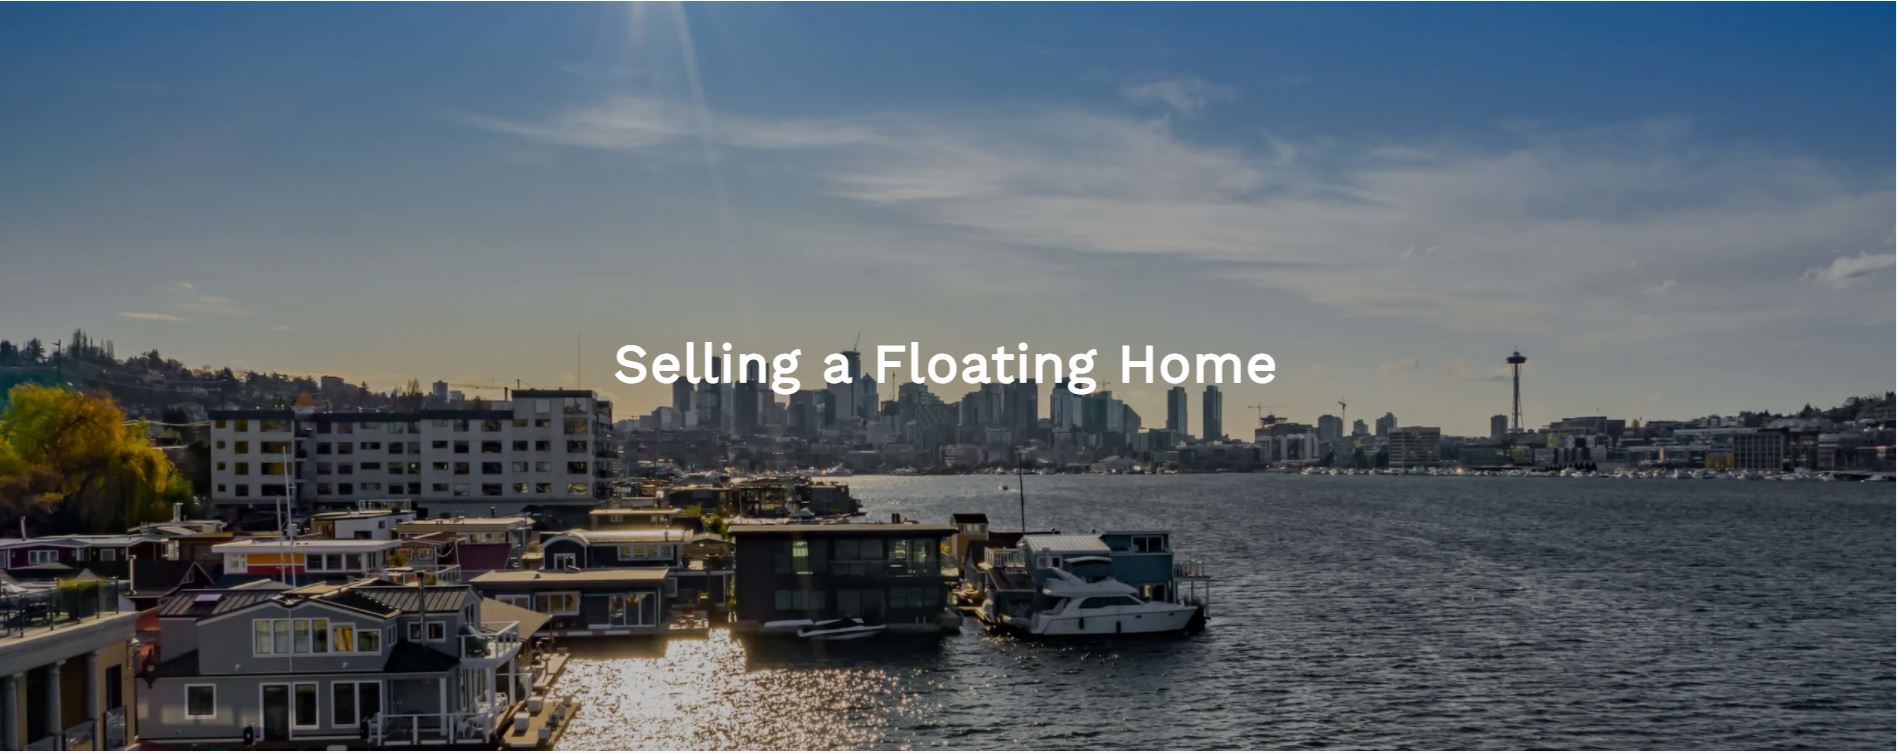 Floating Selling home